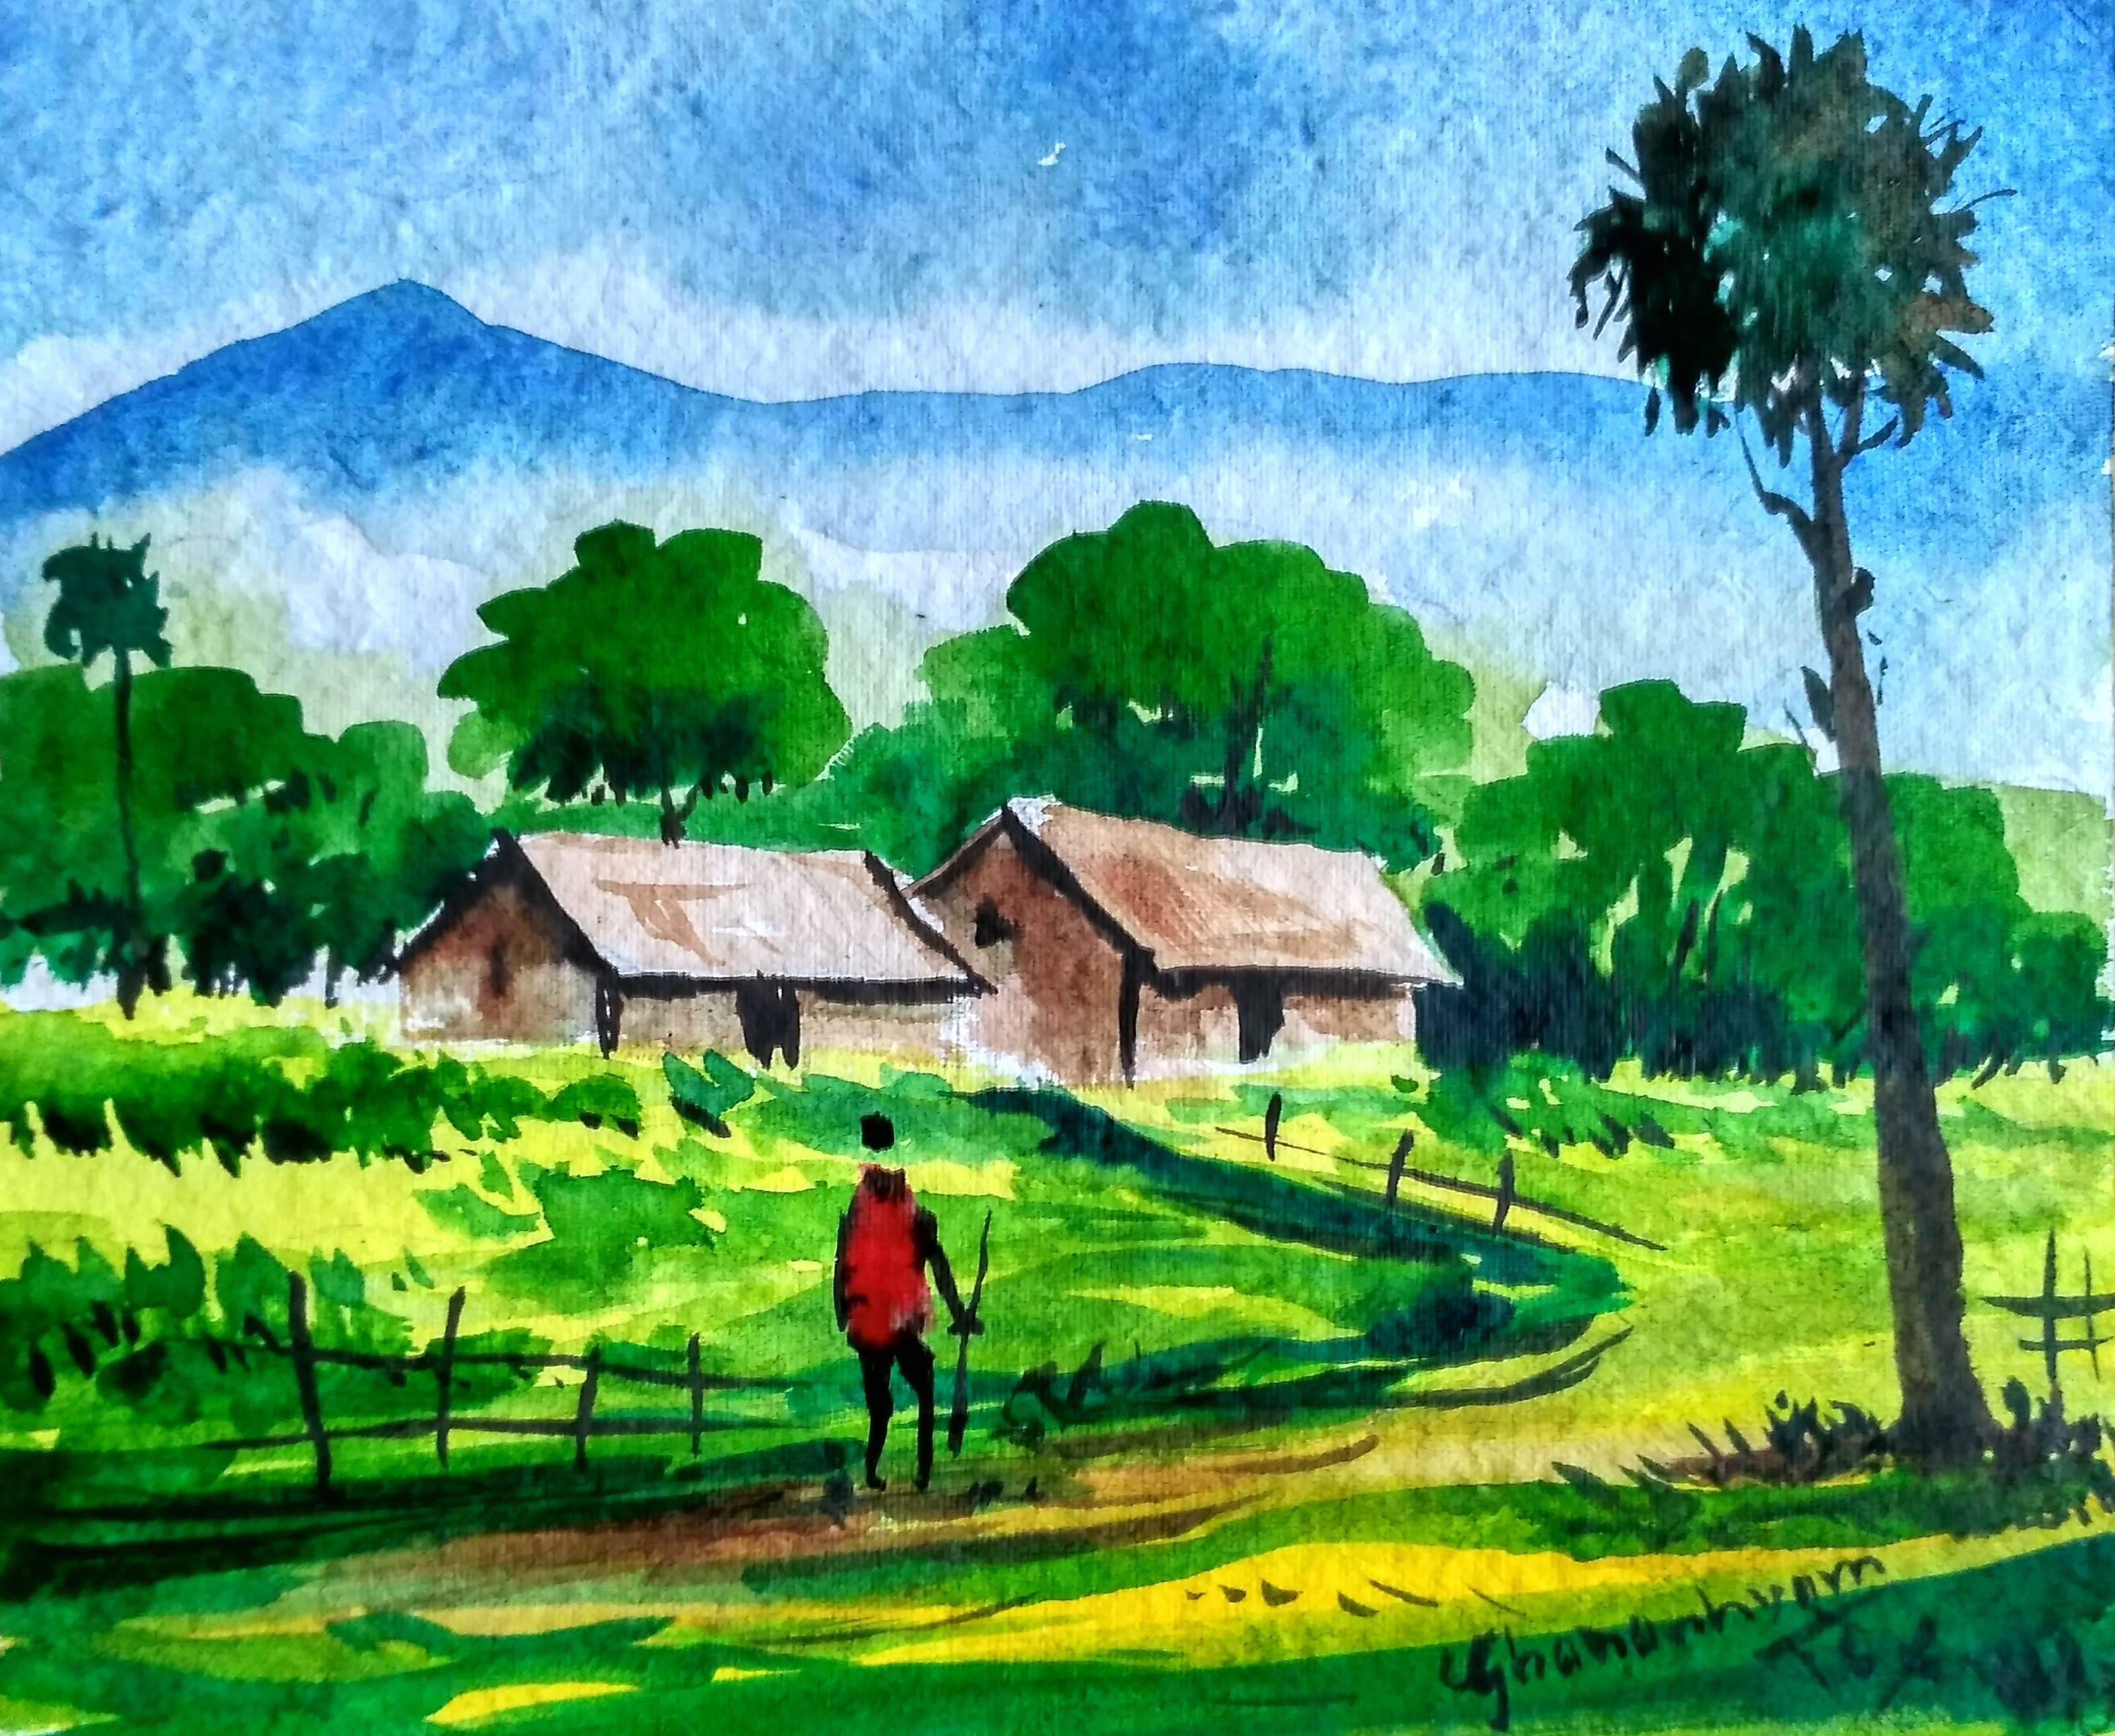 Simple Watercolor Paintings Of Nature at PaintingValley.com | Explore